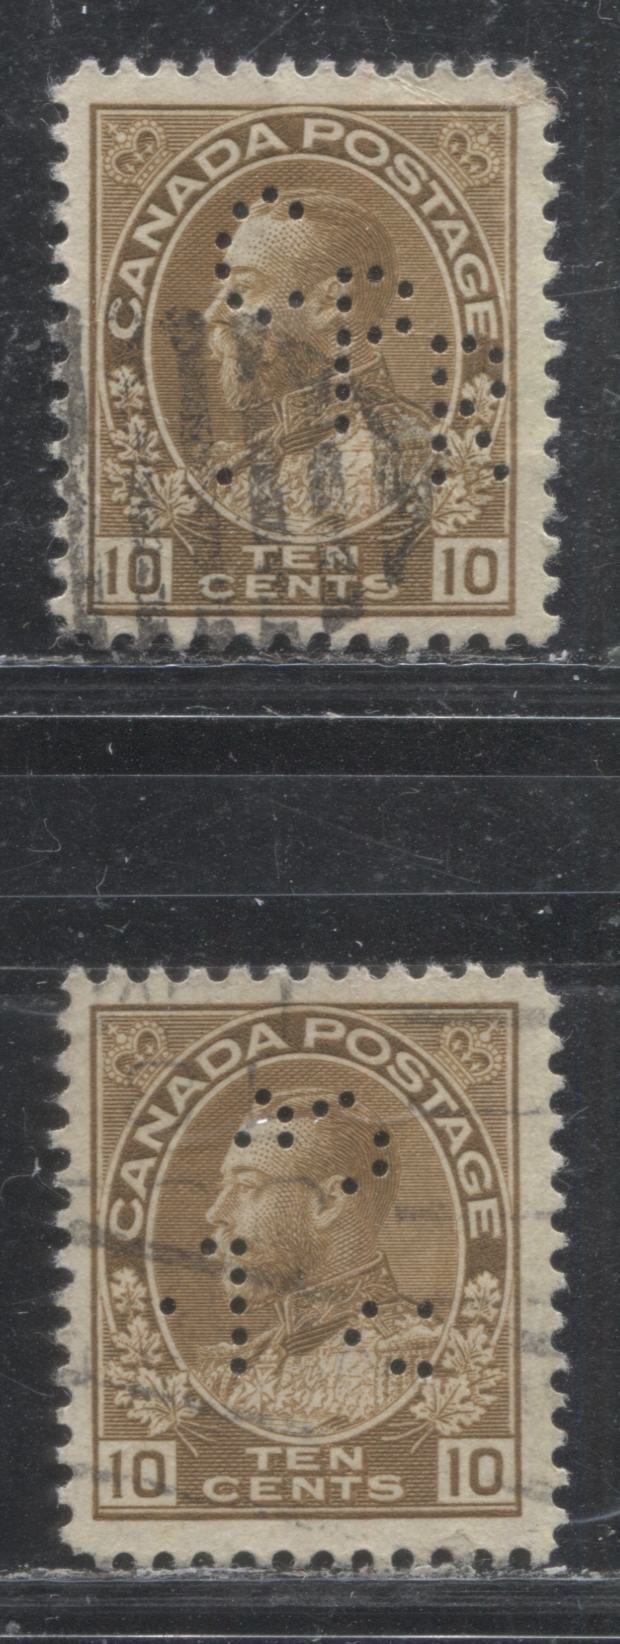 Lot 155 Canada #118 10c Pale Bistre Brown (Bistre Brown in Unitrade) King George V, 1911-1928 Admiral Issue, Two Very Fine Used CPR Perfin Singles, Dry Printing